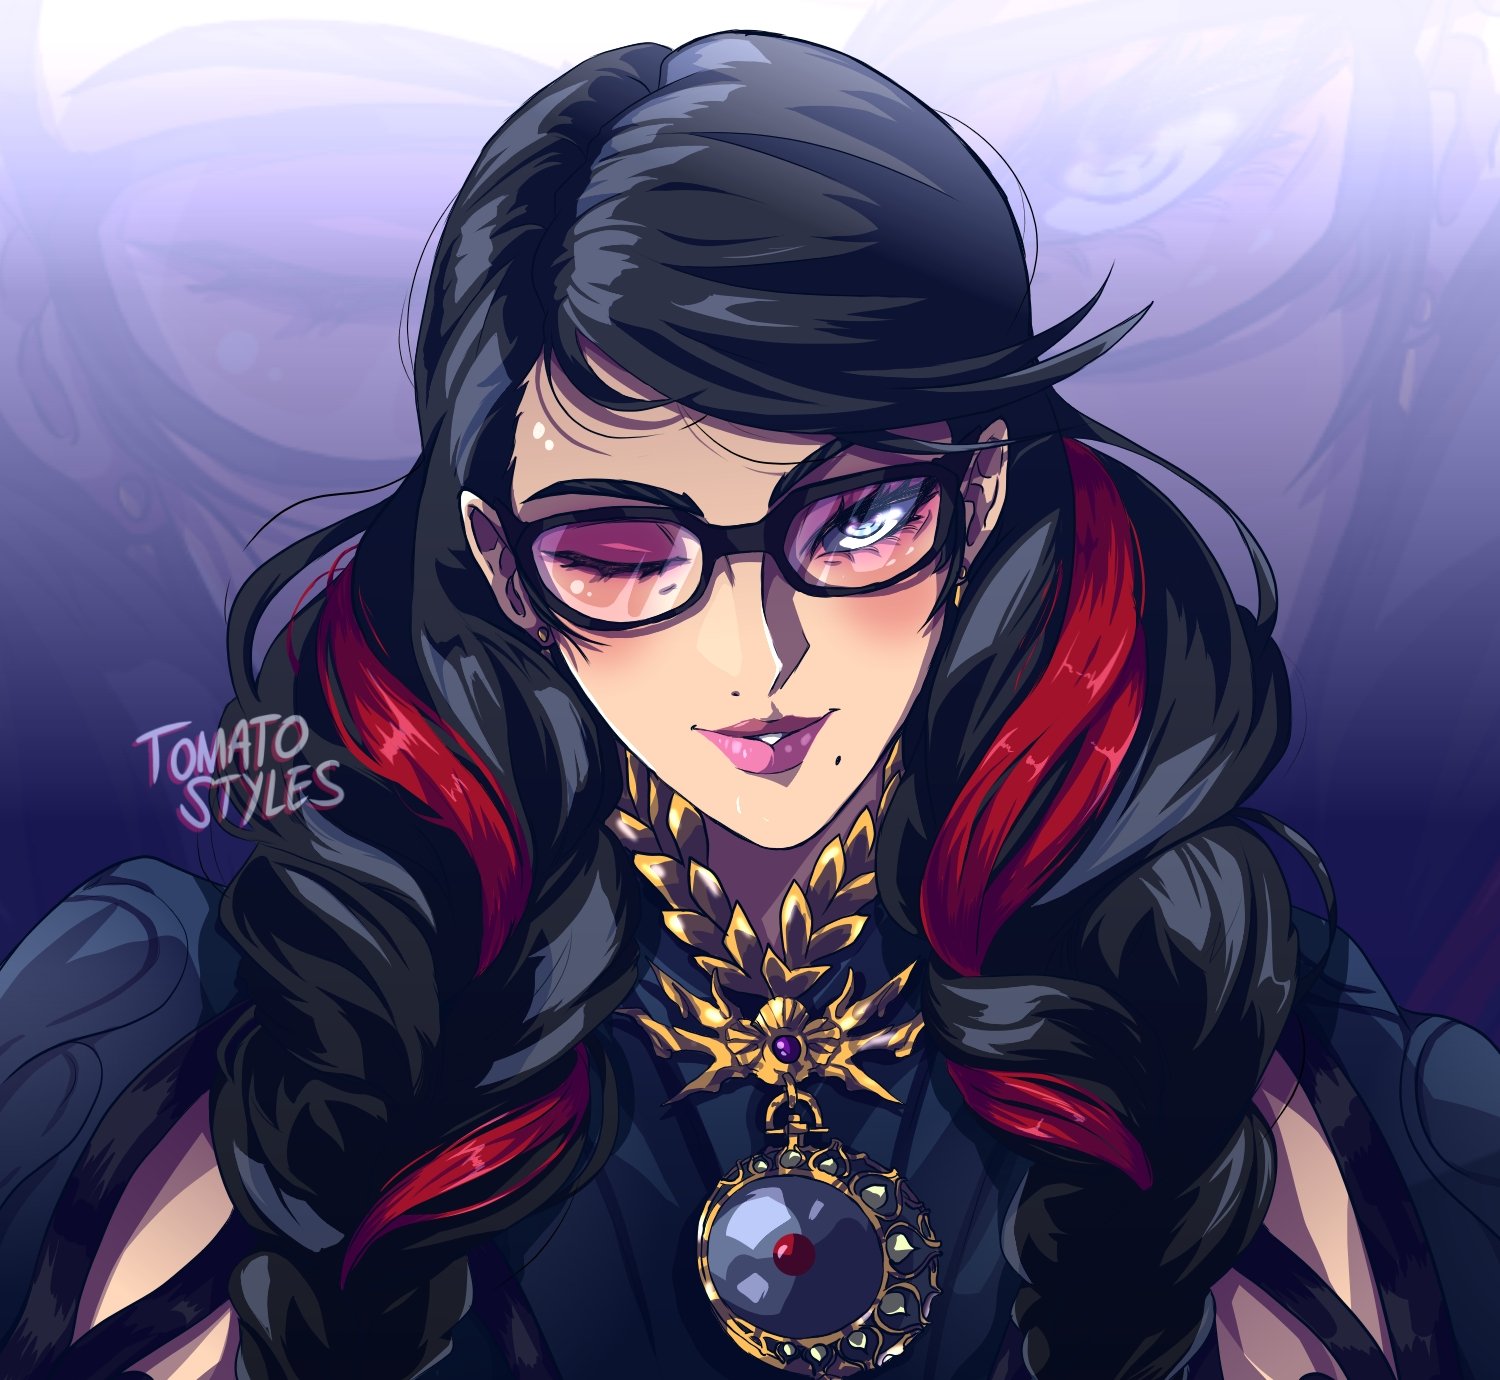 Tomato Styles on Twitter: "Reposting a few of my Bayonetta drawings I ...